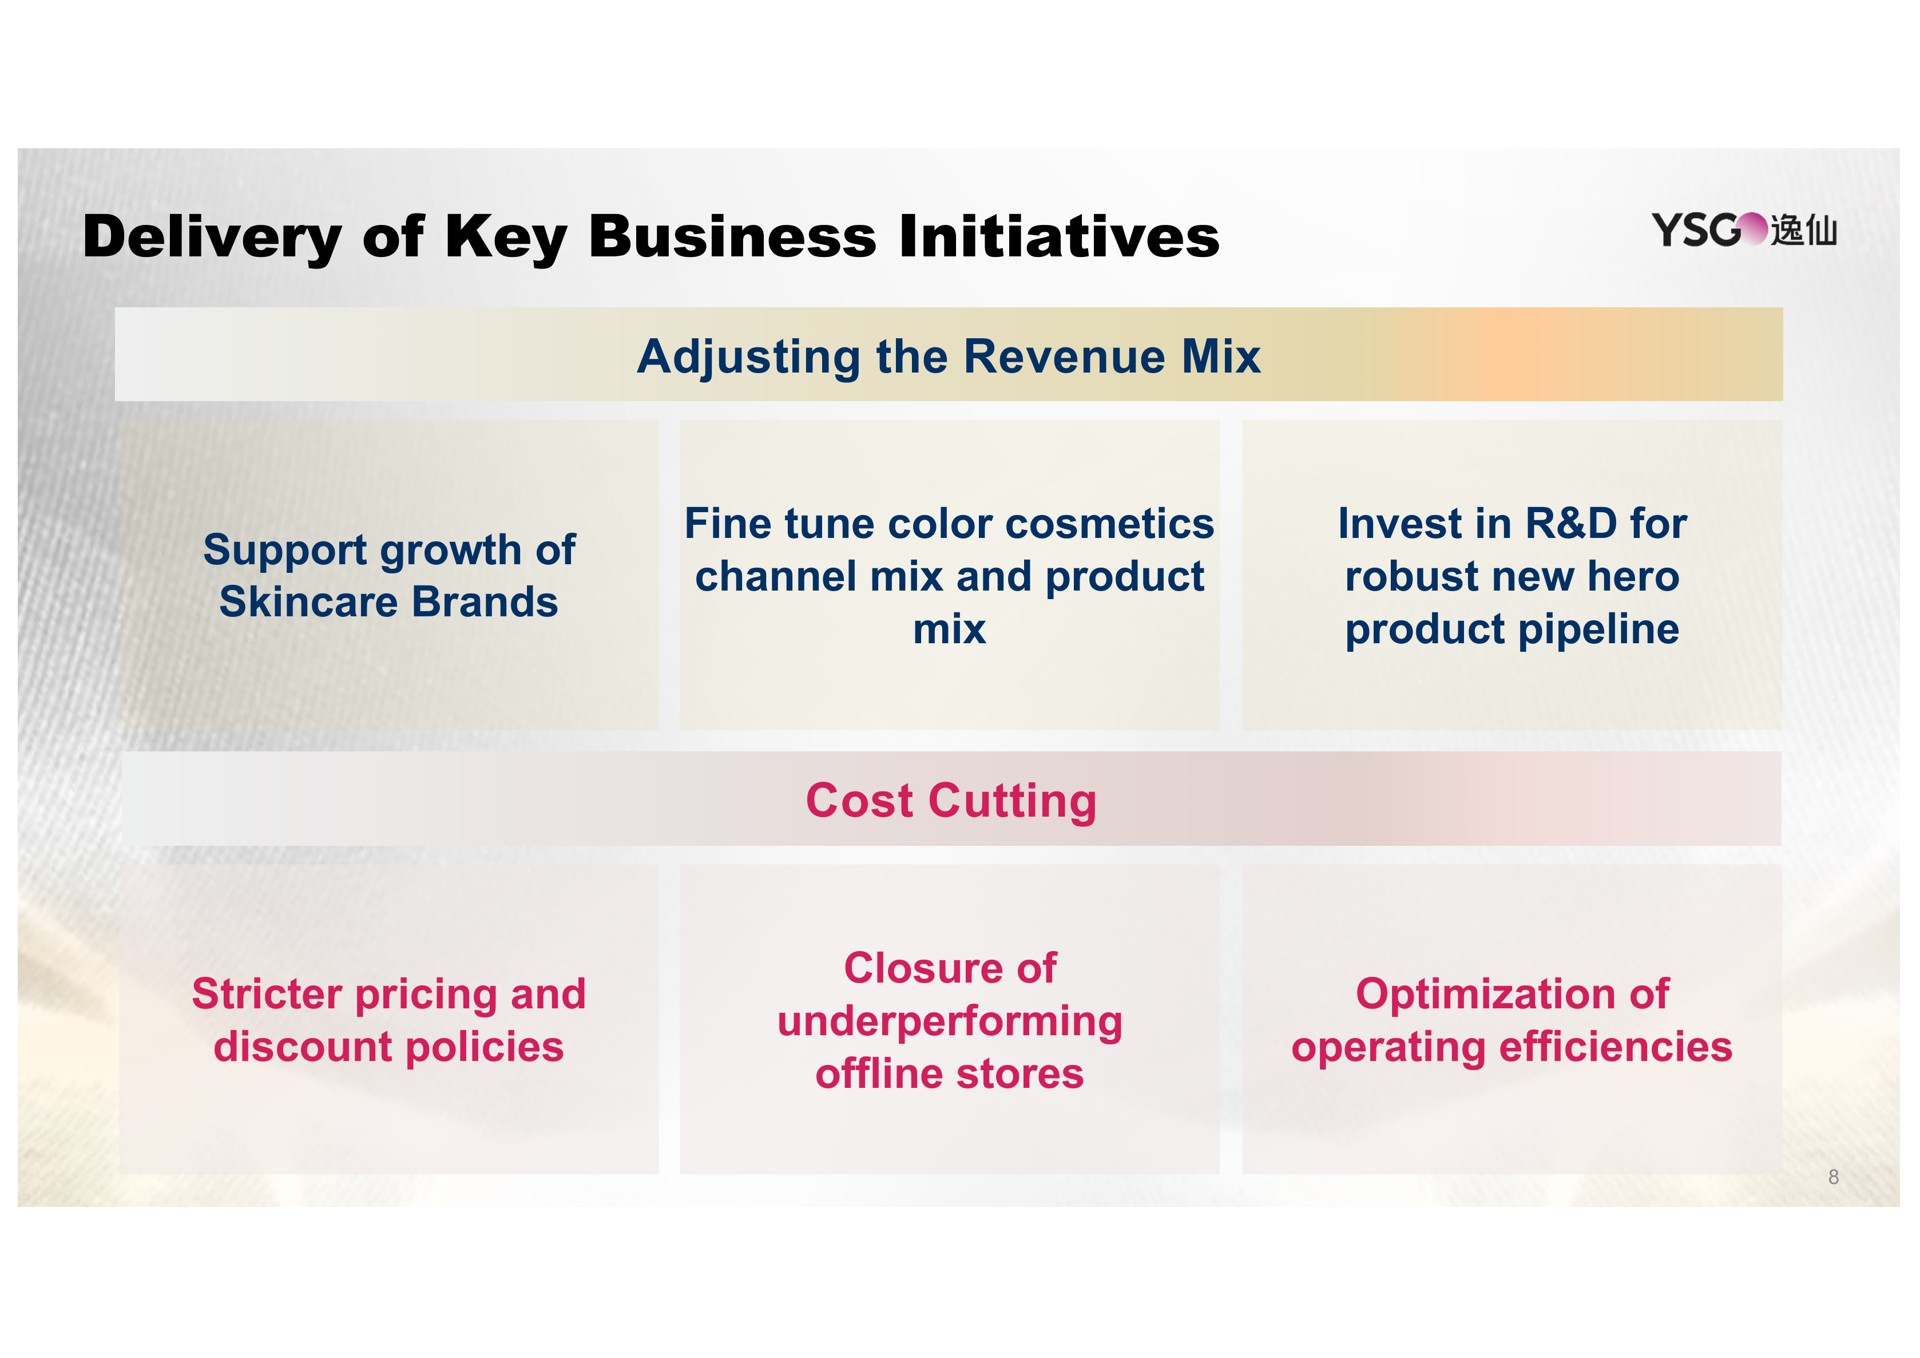 delivery of key business initiatives adjusting the revenue mix support growth of brands fine tune color cosmetics channel mix and product mix invest in for robust new hero product pipeline cost cutting pricing and discount policies closure of stores optimization of operating efficiencies a | Yatsen